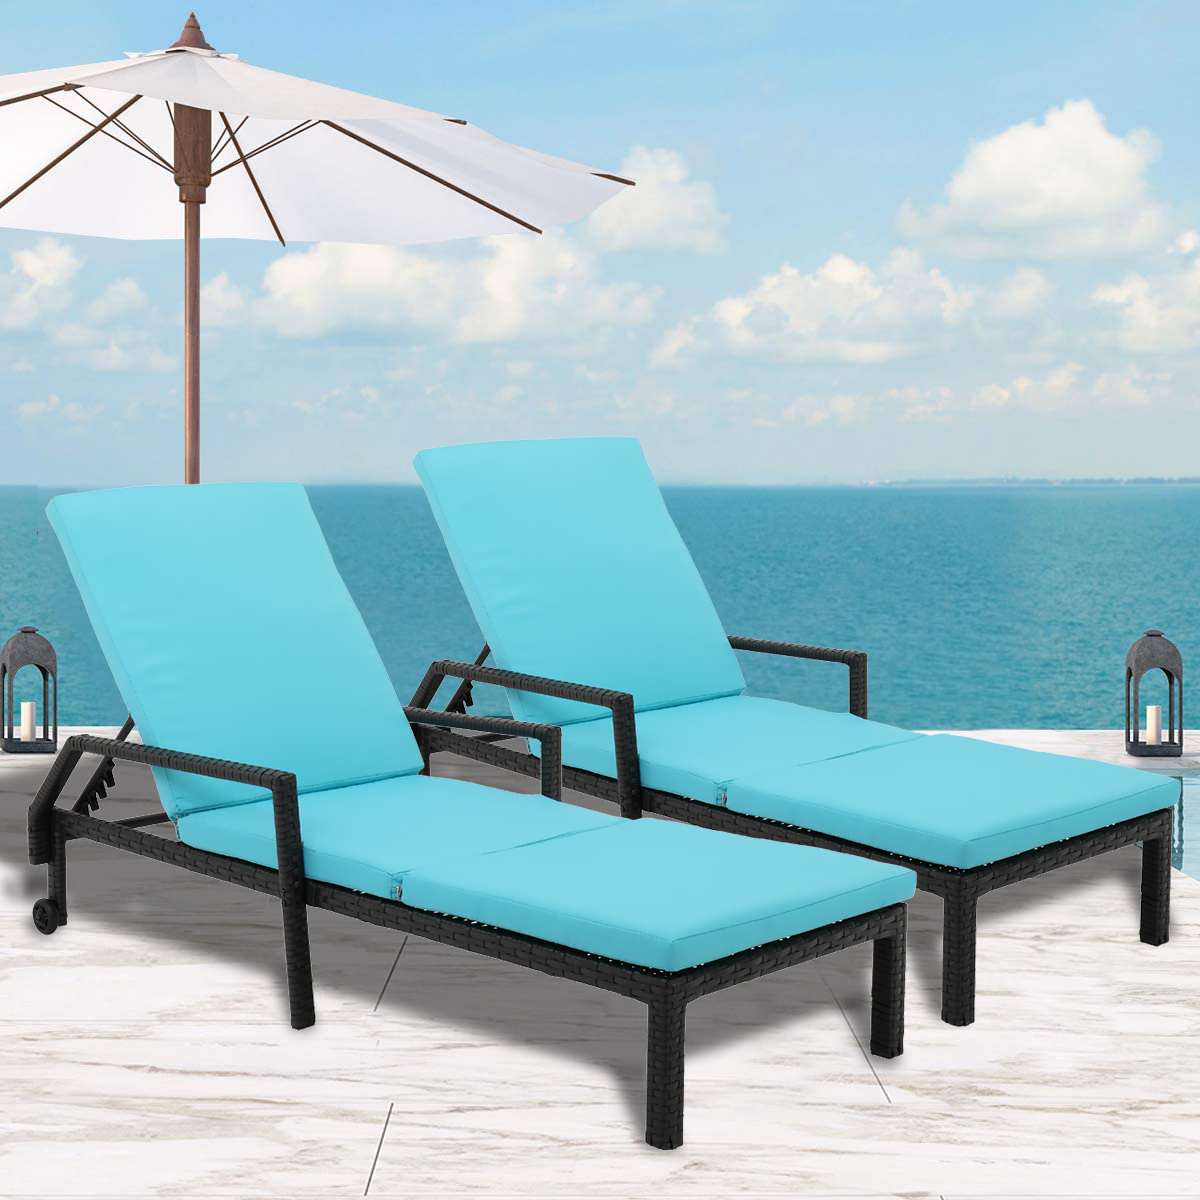 Outdoor Lounge Chair Set of 2, BTMWAY Adjustable Wicker Chaise Lounges for Patio, Outdoor PE Rattan Chaise Lounge Chairs with Blue Cushion and Wheels, Patio Furniture Recliner for Poolside Deck - image 1 of 14